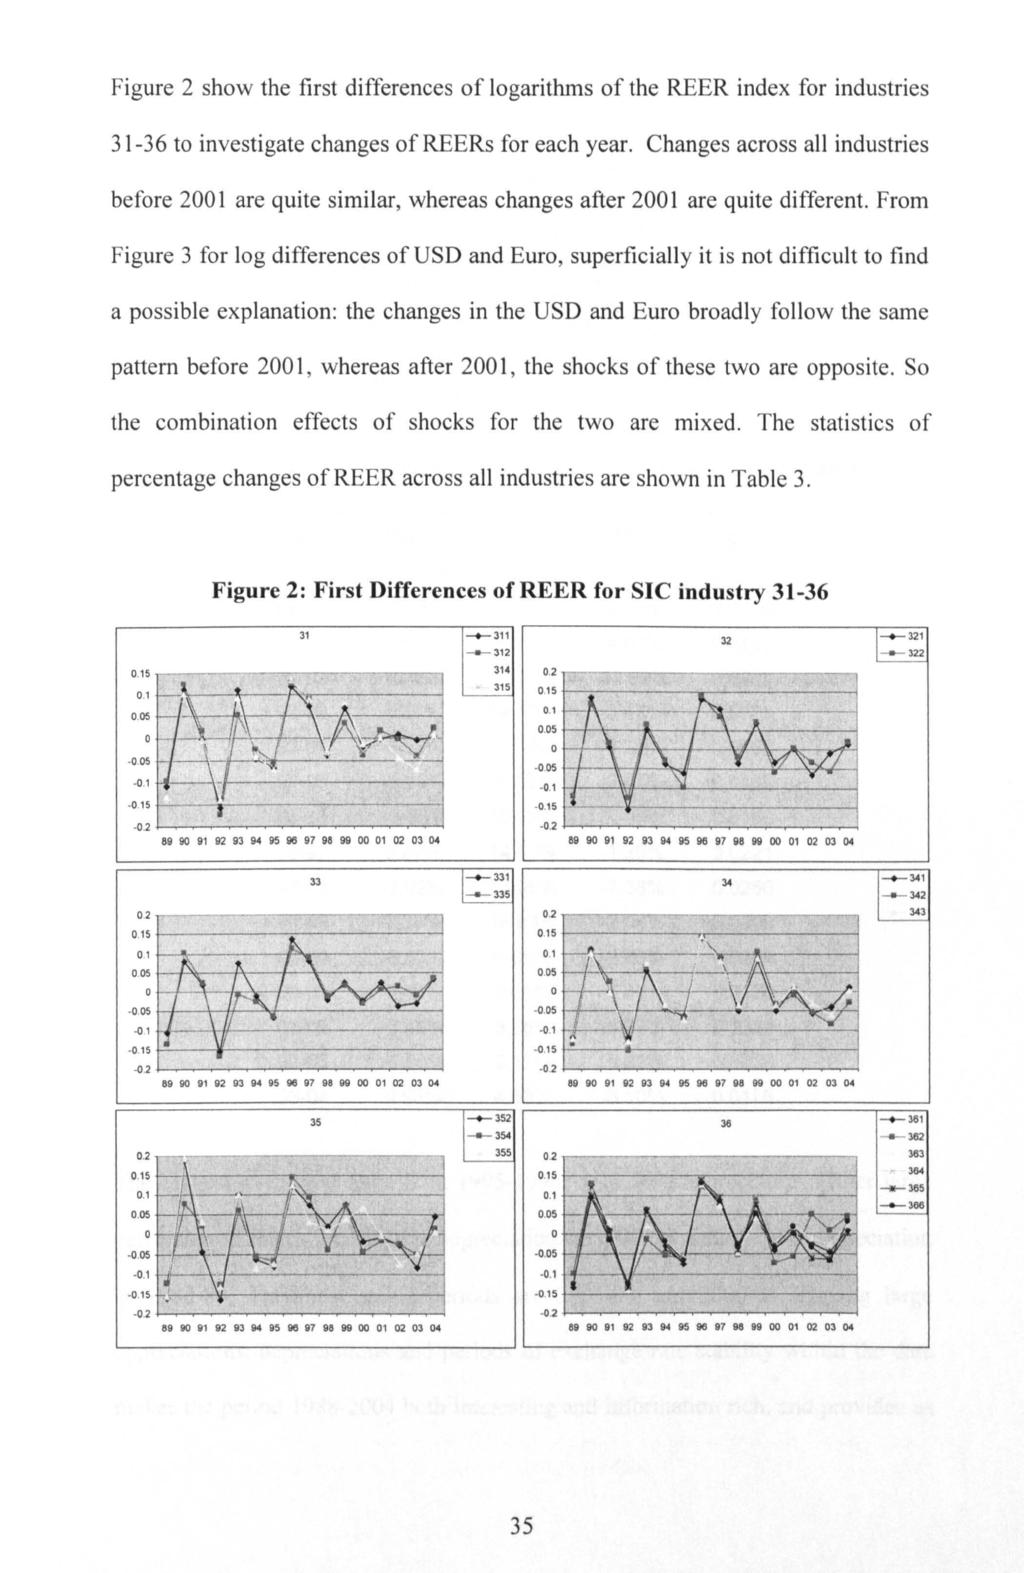 Figure 2 show the first differences of logarithms of the REER index for industries 31-36 to investigate changes of REERs for each year.